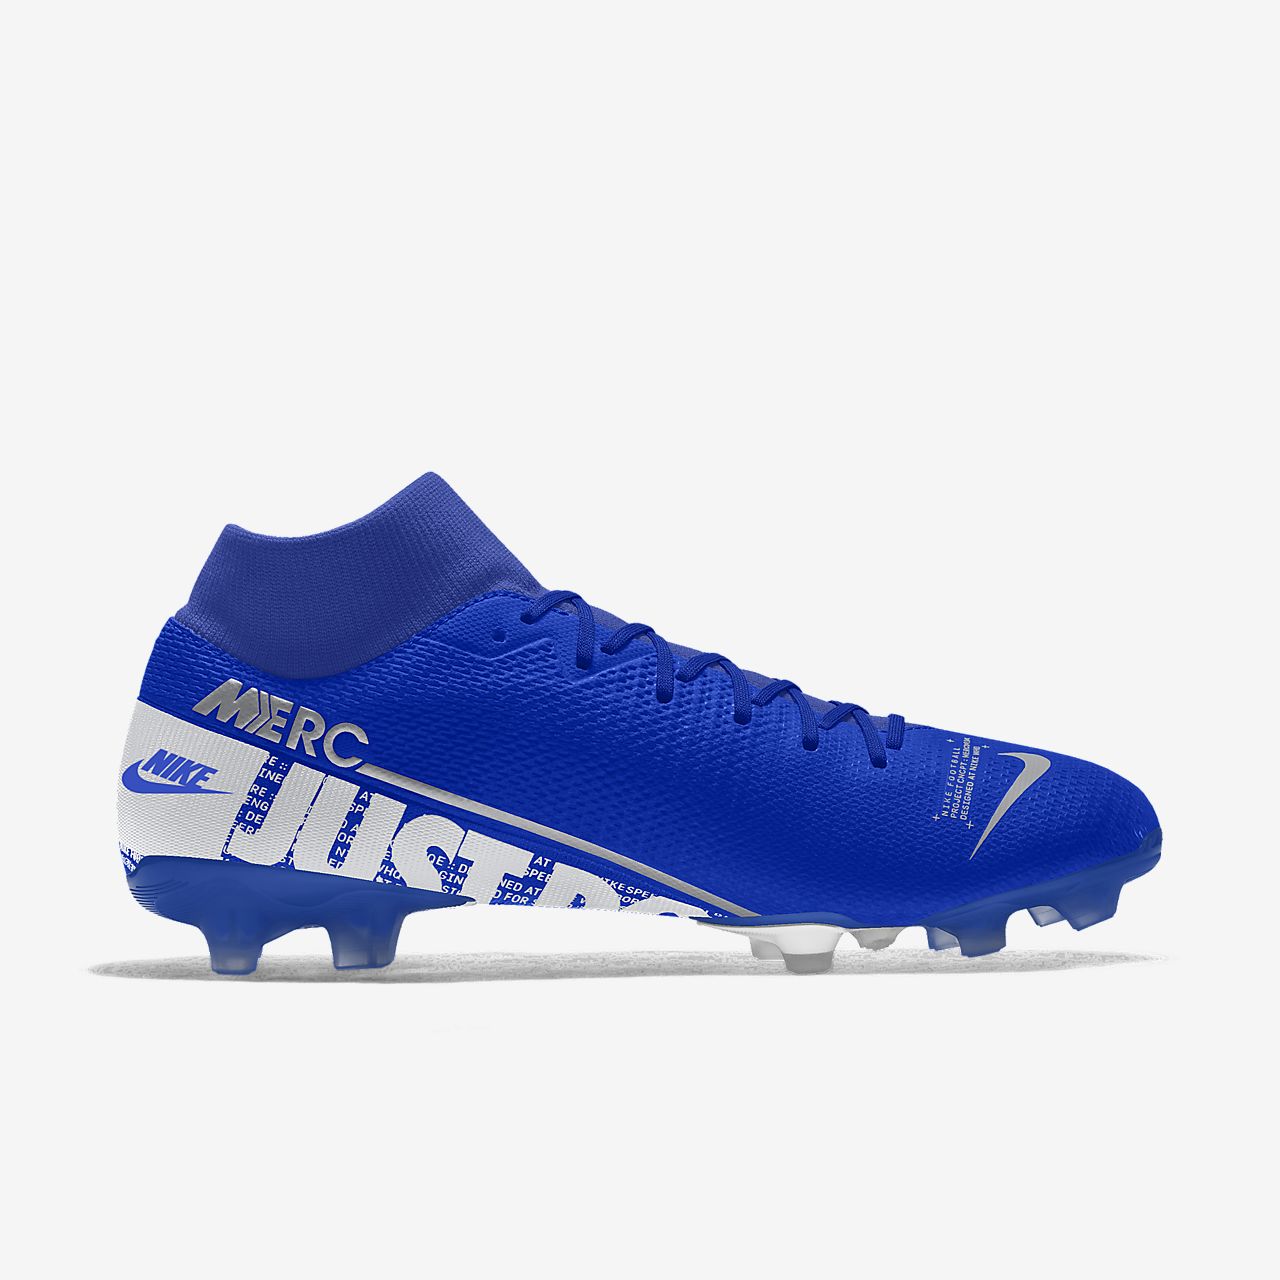 Nike Mercurial Superfly V AG PRO Soccer Cleats Nike